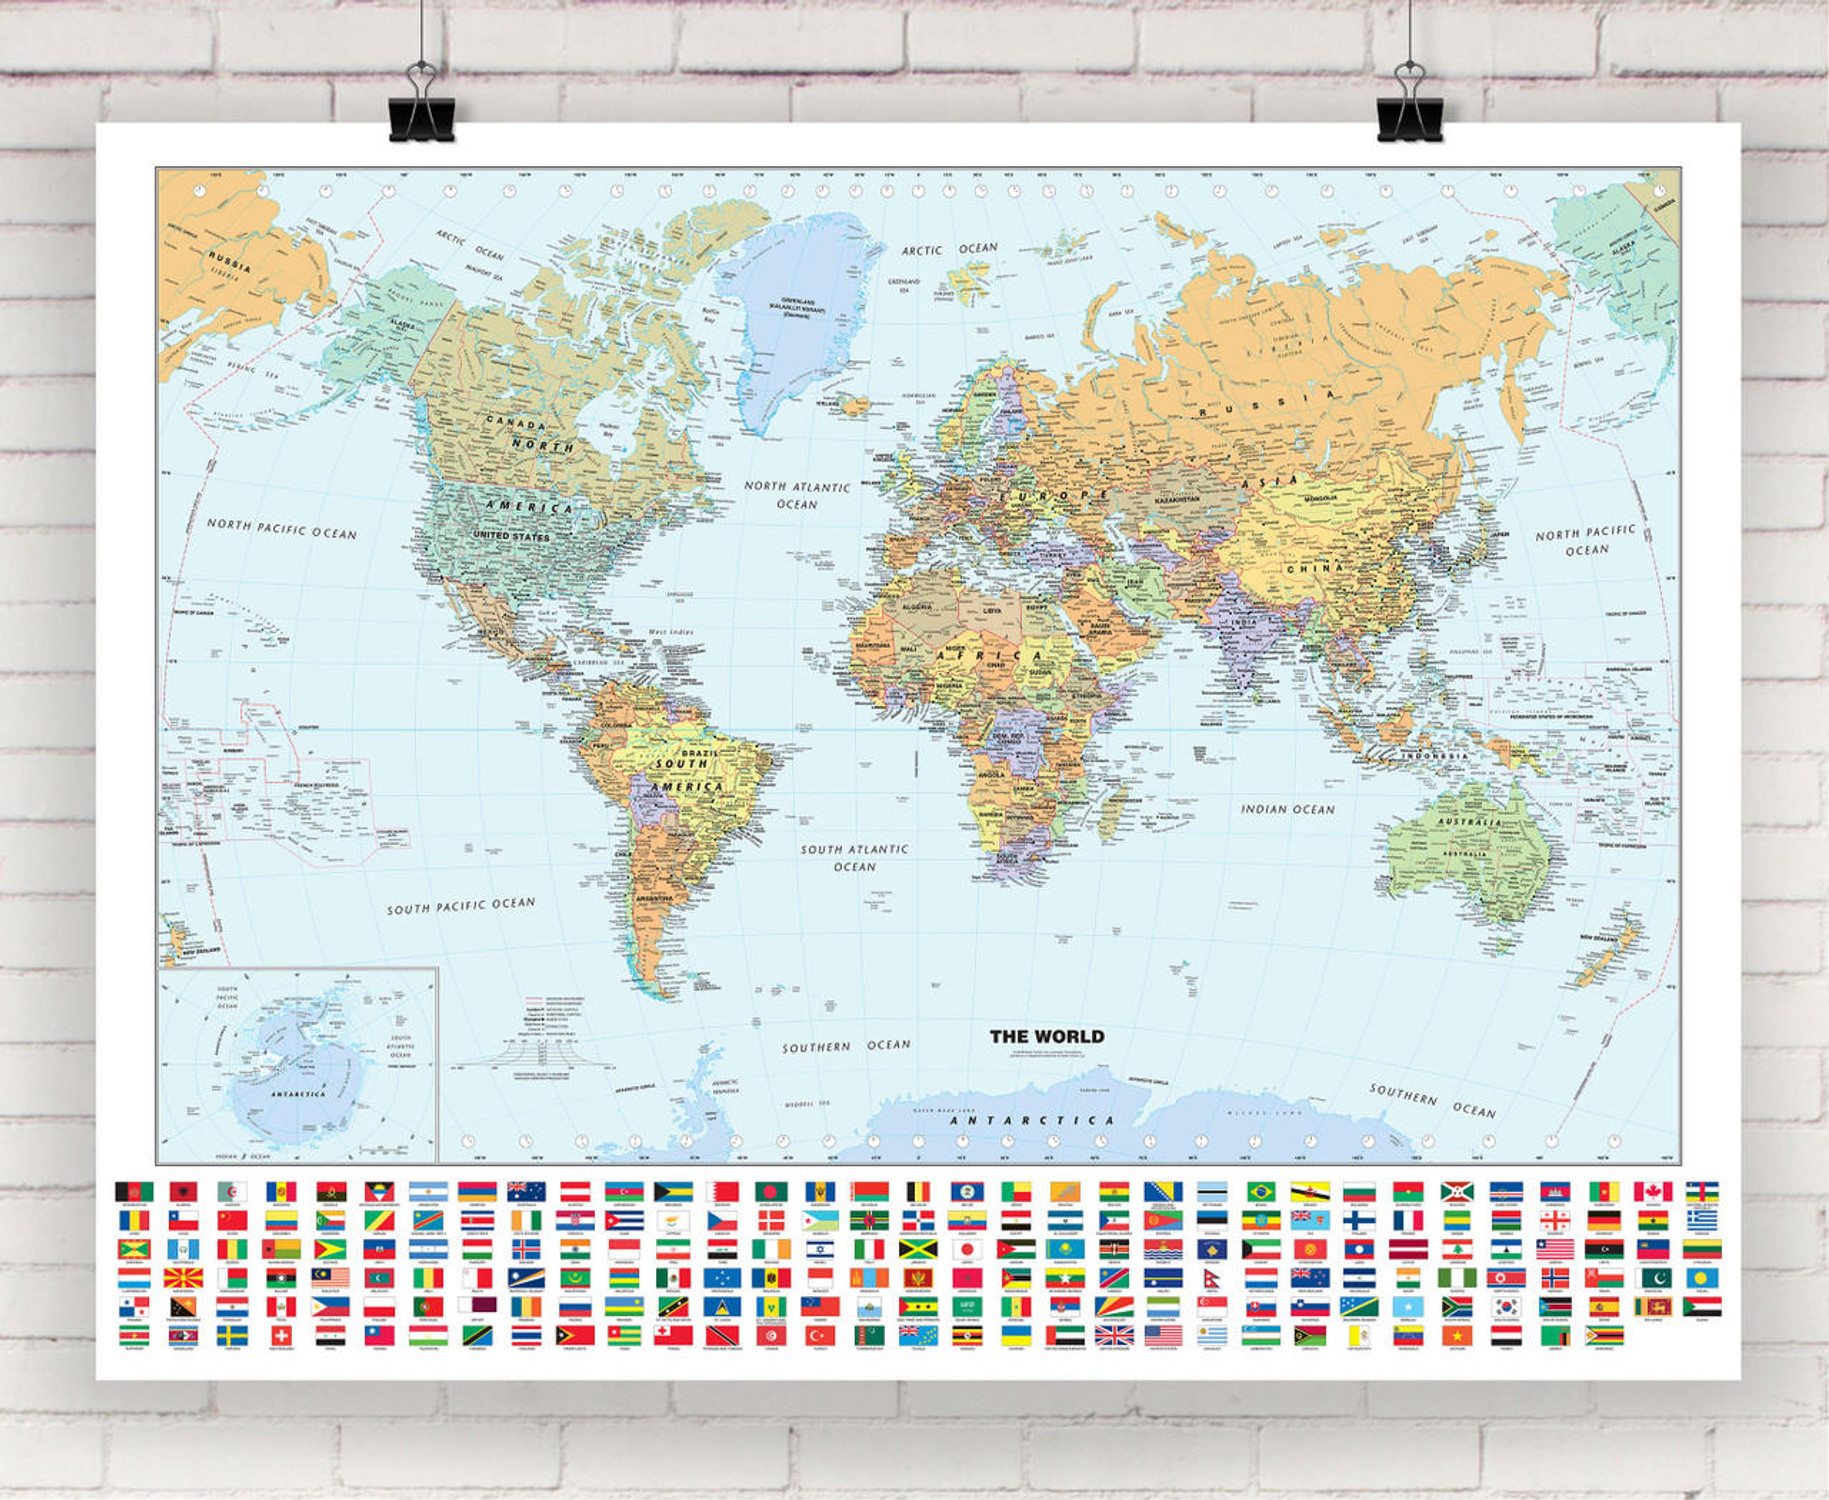 Classic World Wall Map with Flags, image 1, World Maps Online